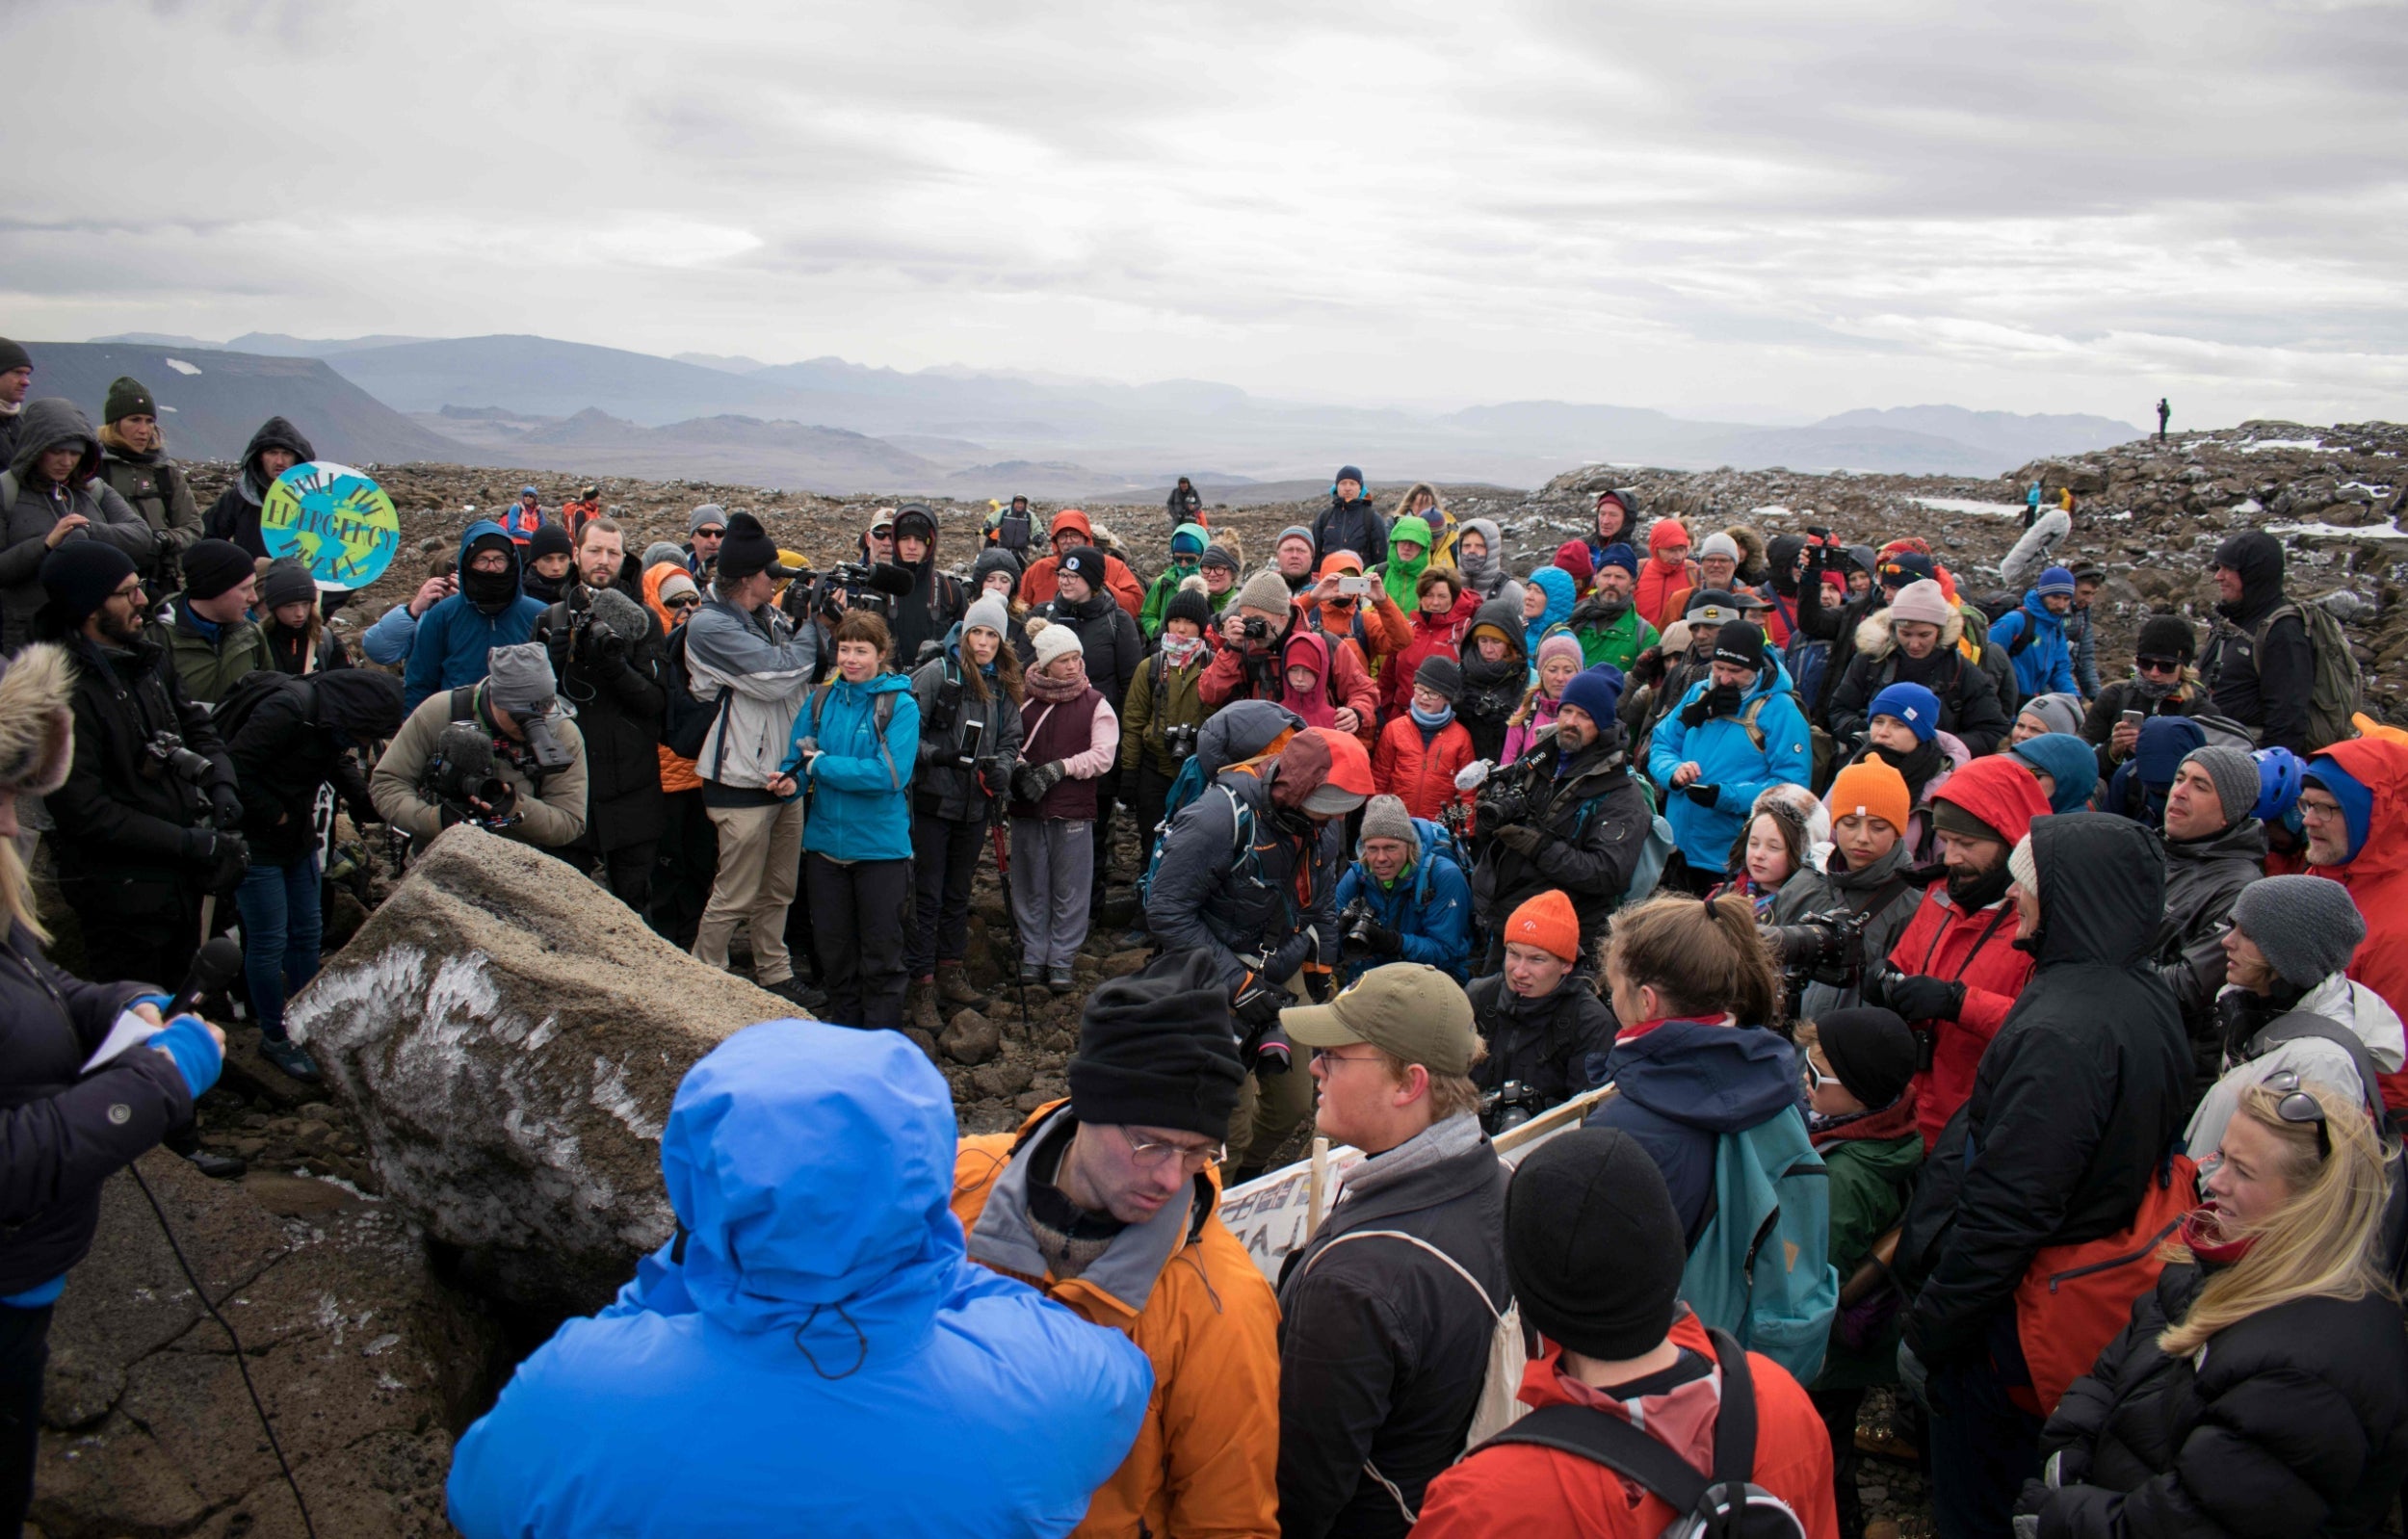 A monument is unveiled at the site of Okjokull, Iceland's first glacier lost to climate change in the west of Iceland on August 18, 2019